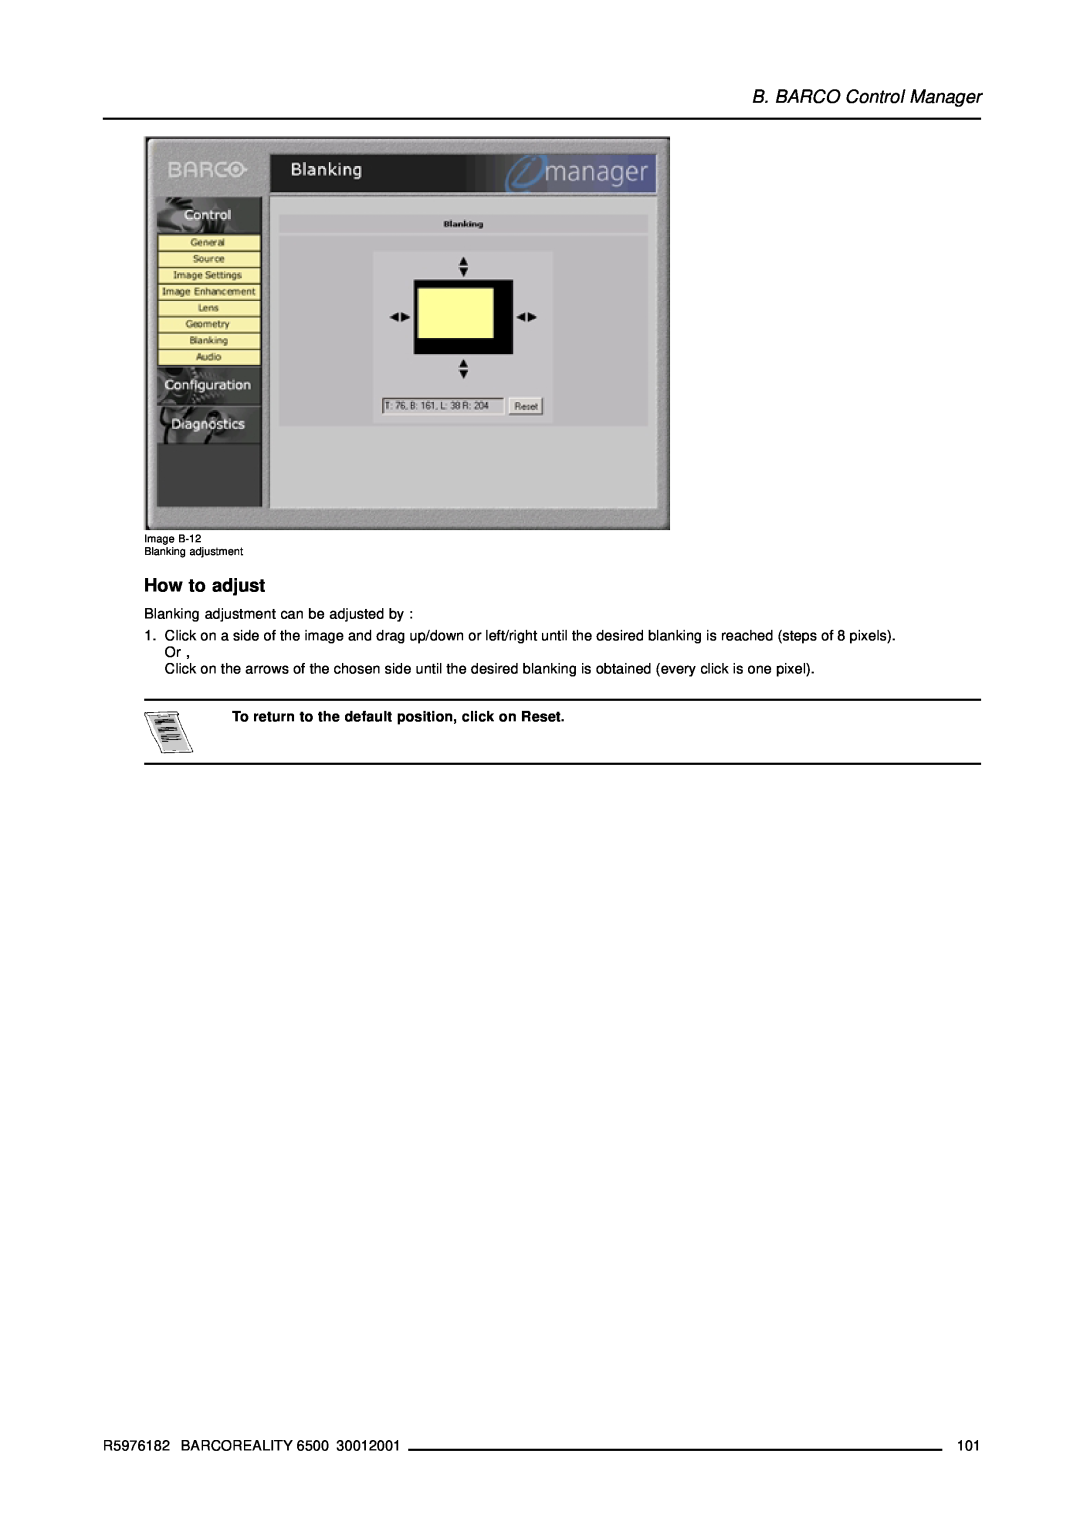 Barco R9001960 owner manual How to adjust, B. BARCO Control Manager, To return to the default position, click on Reset 